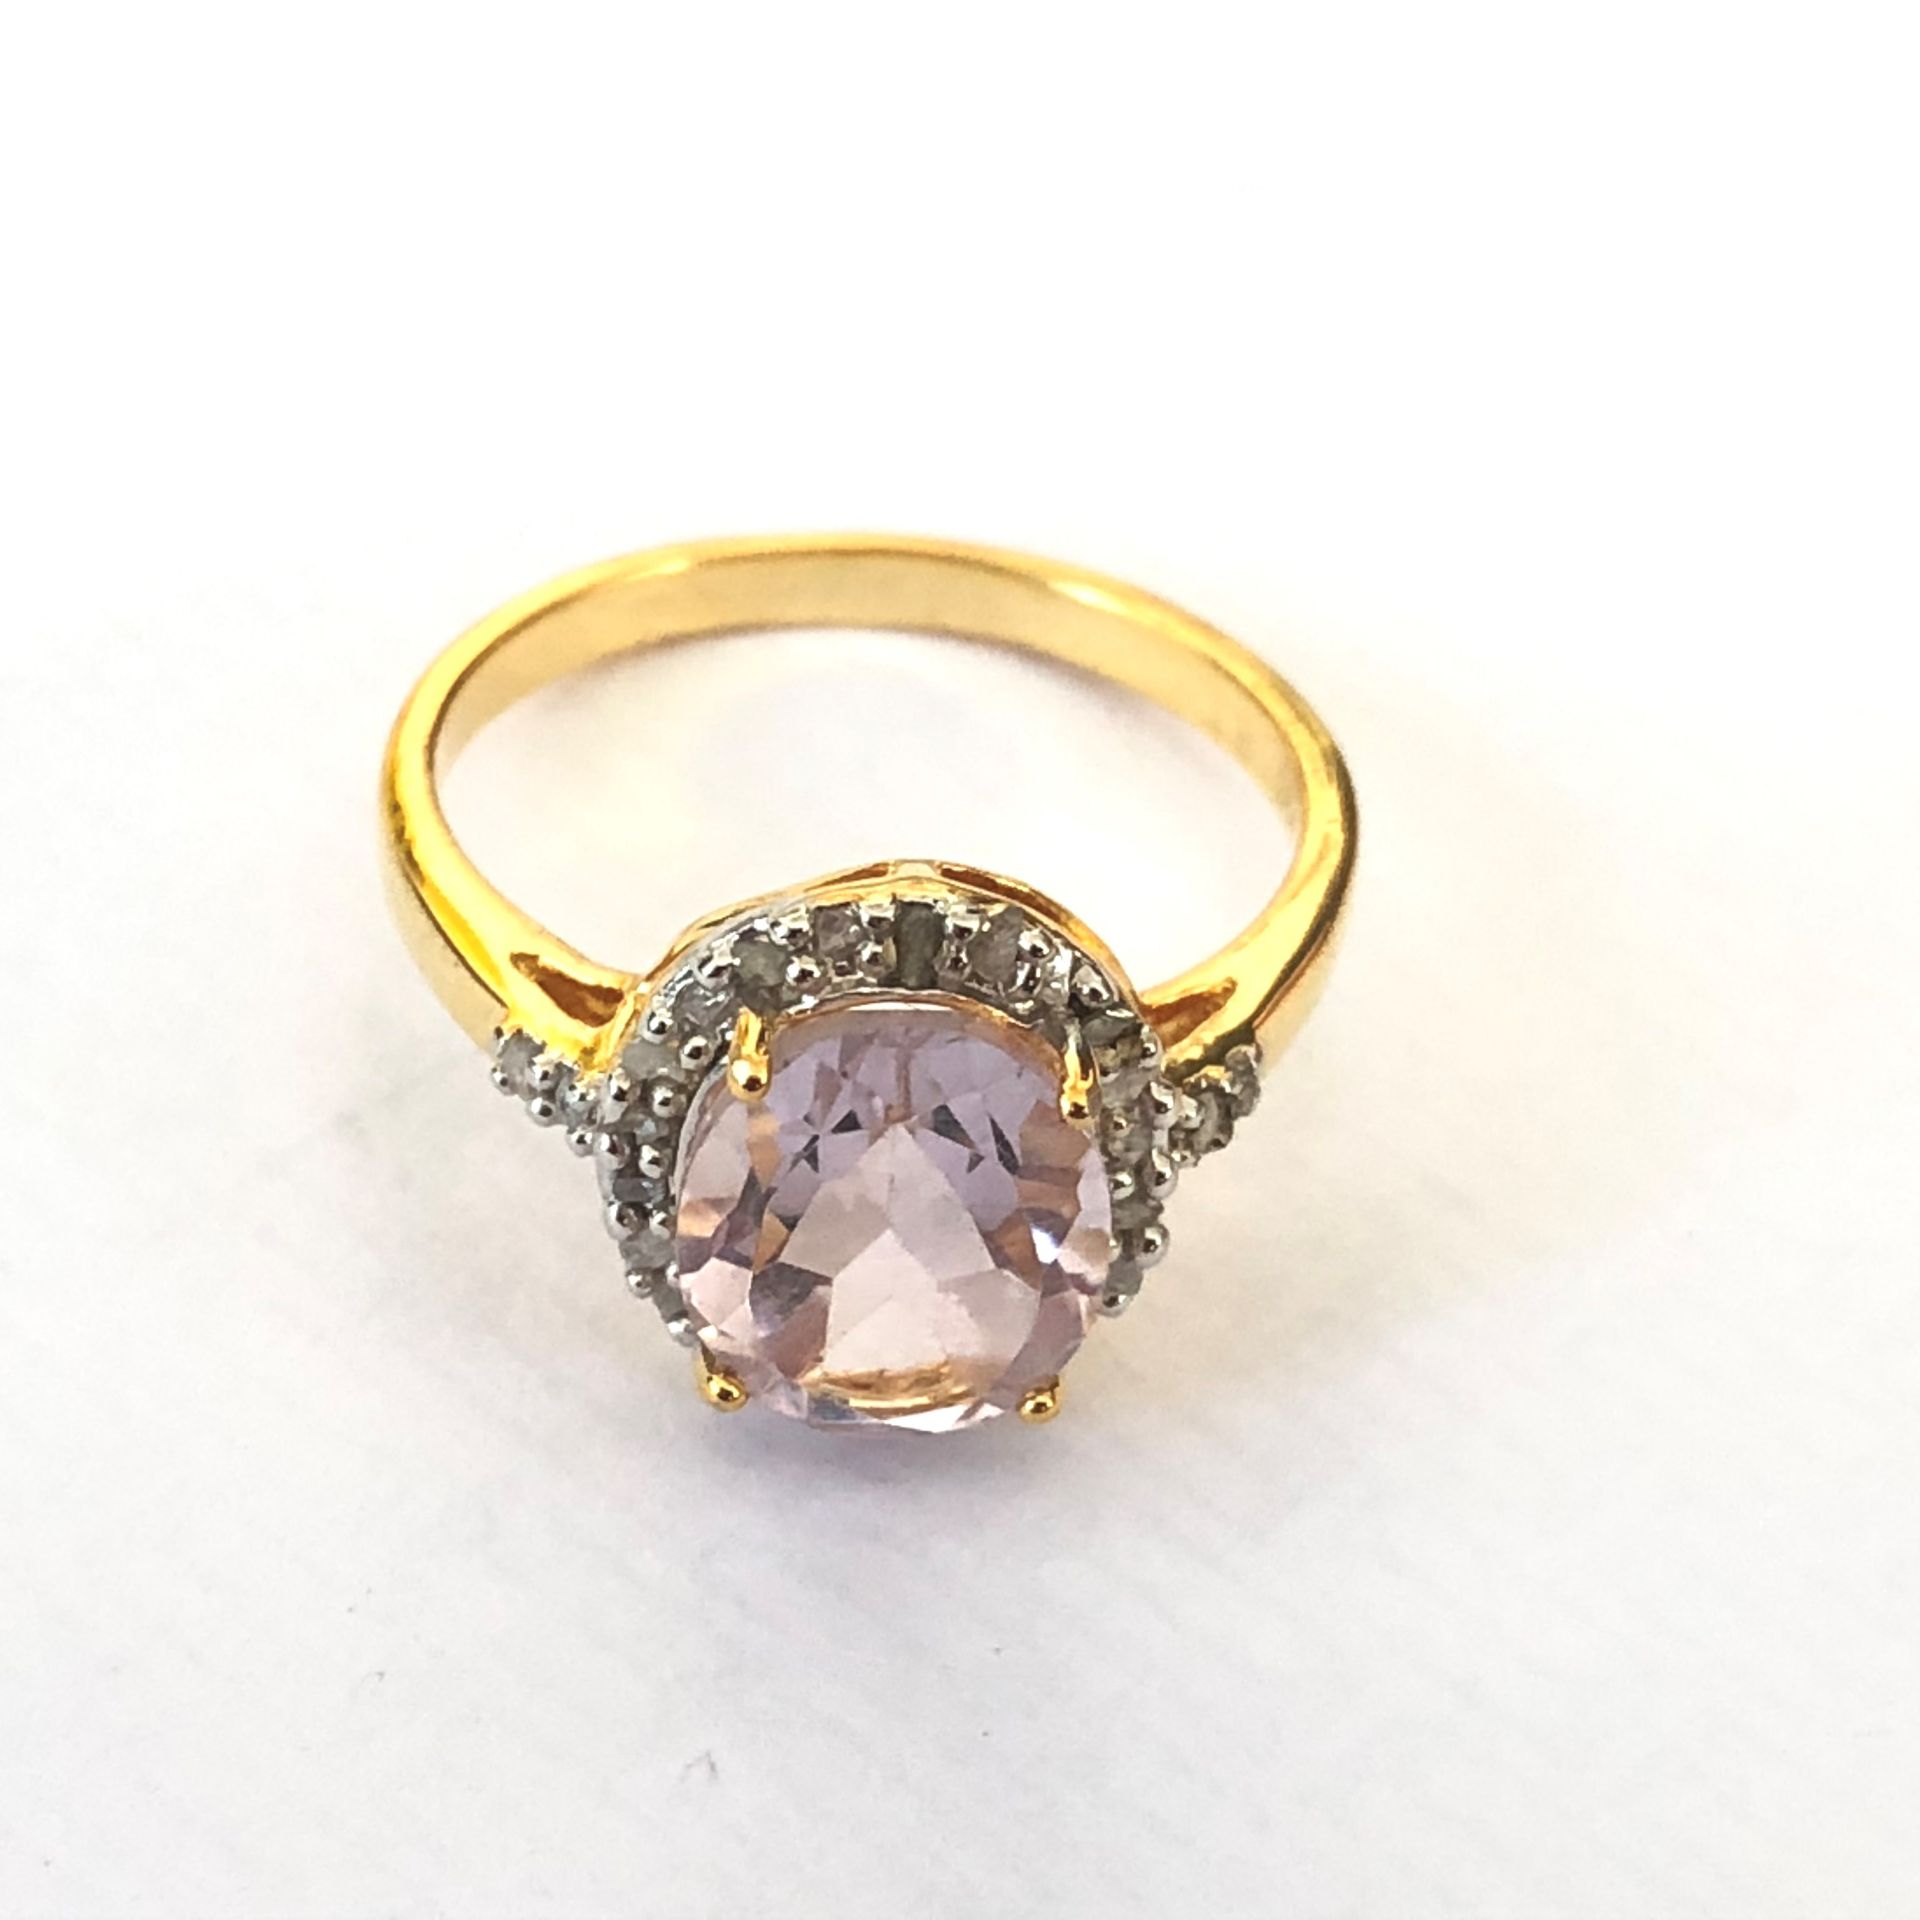 18k gold over sterling silver, pink amethyst and diamond ring - Image 2 of 2